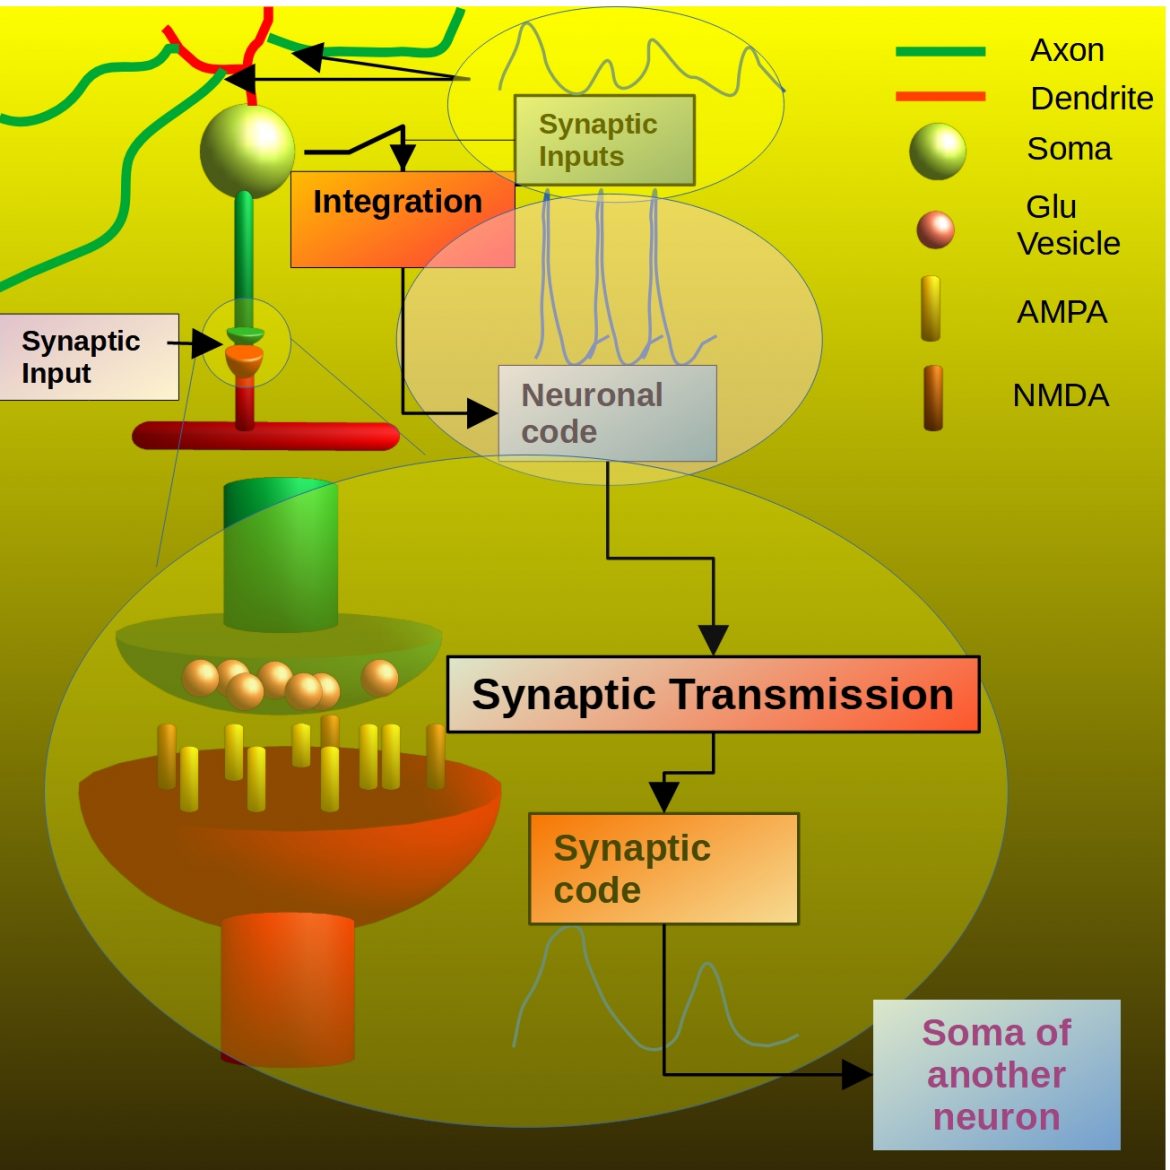 Brain information processing: Modeling of synaptic information transfer and integration in the neuronal activity